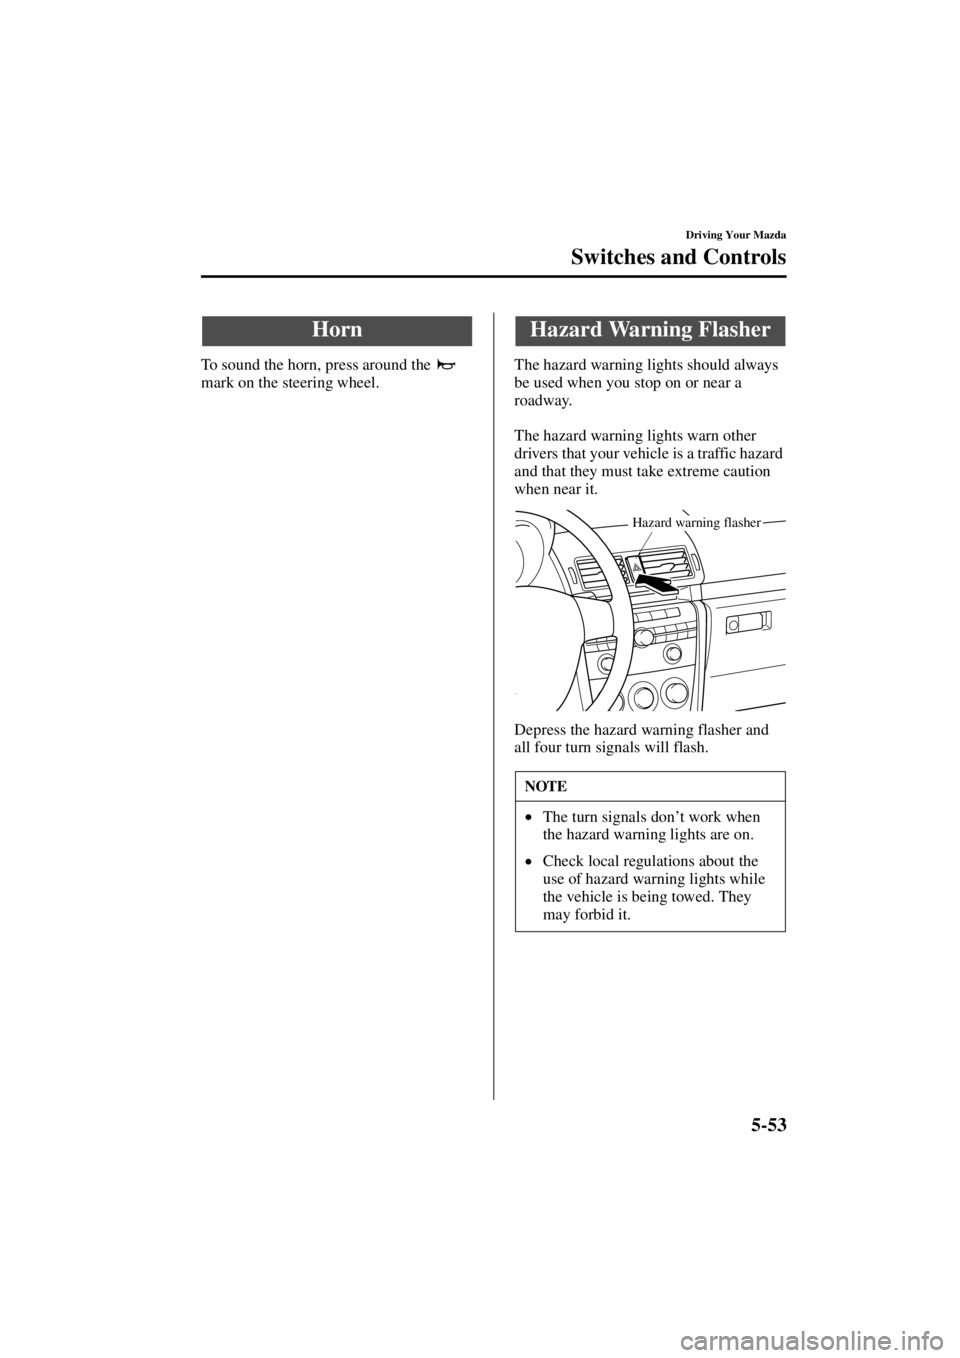 MAZDA MODEL 3 5-DOOR 2004  Owners Manual 5-53
Driving Your Mazda
Switches and Controls
Form No. 8S18-EA-03I
To sound the horn, press around the   
mark on the steering wheel.The hazard warning lights should always 
be used when you stop on o